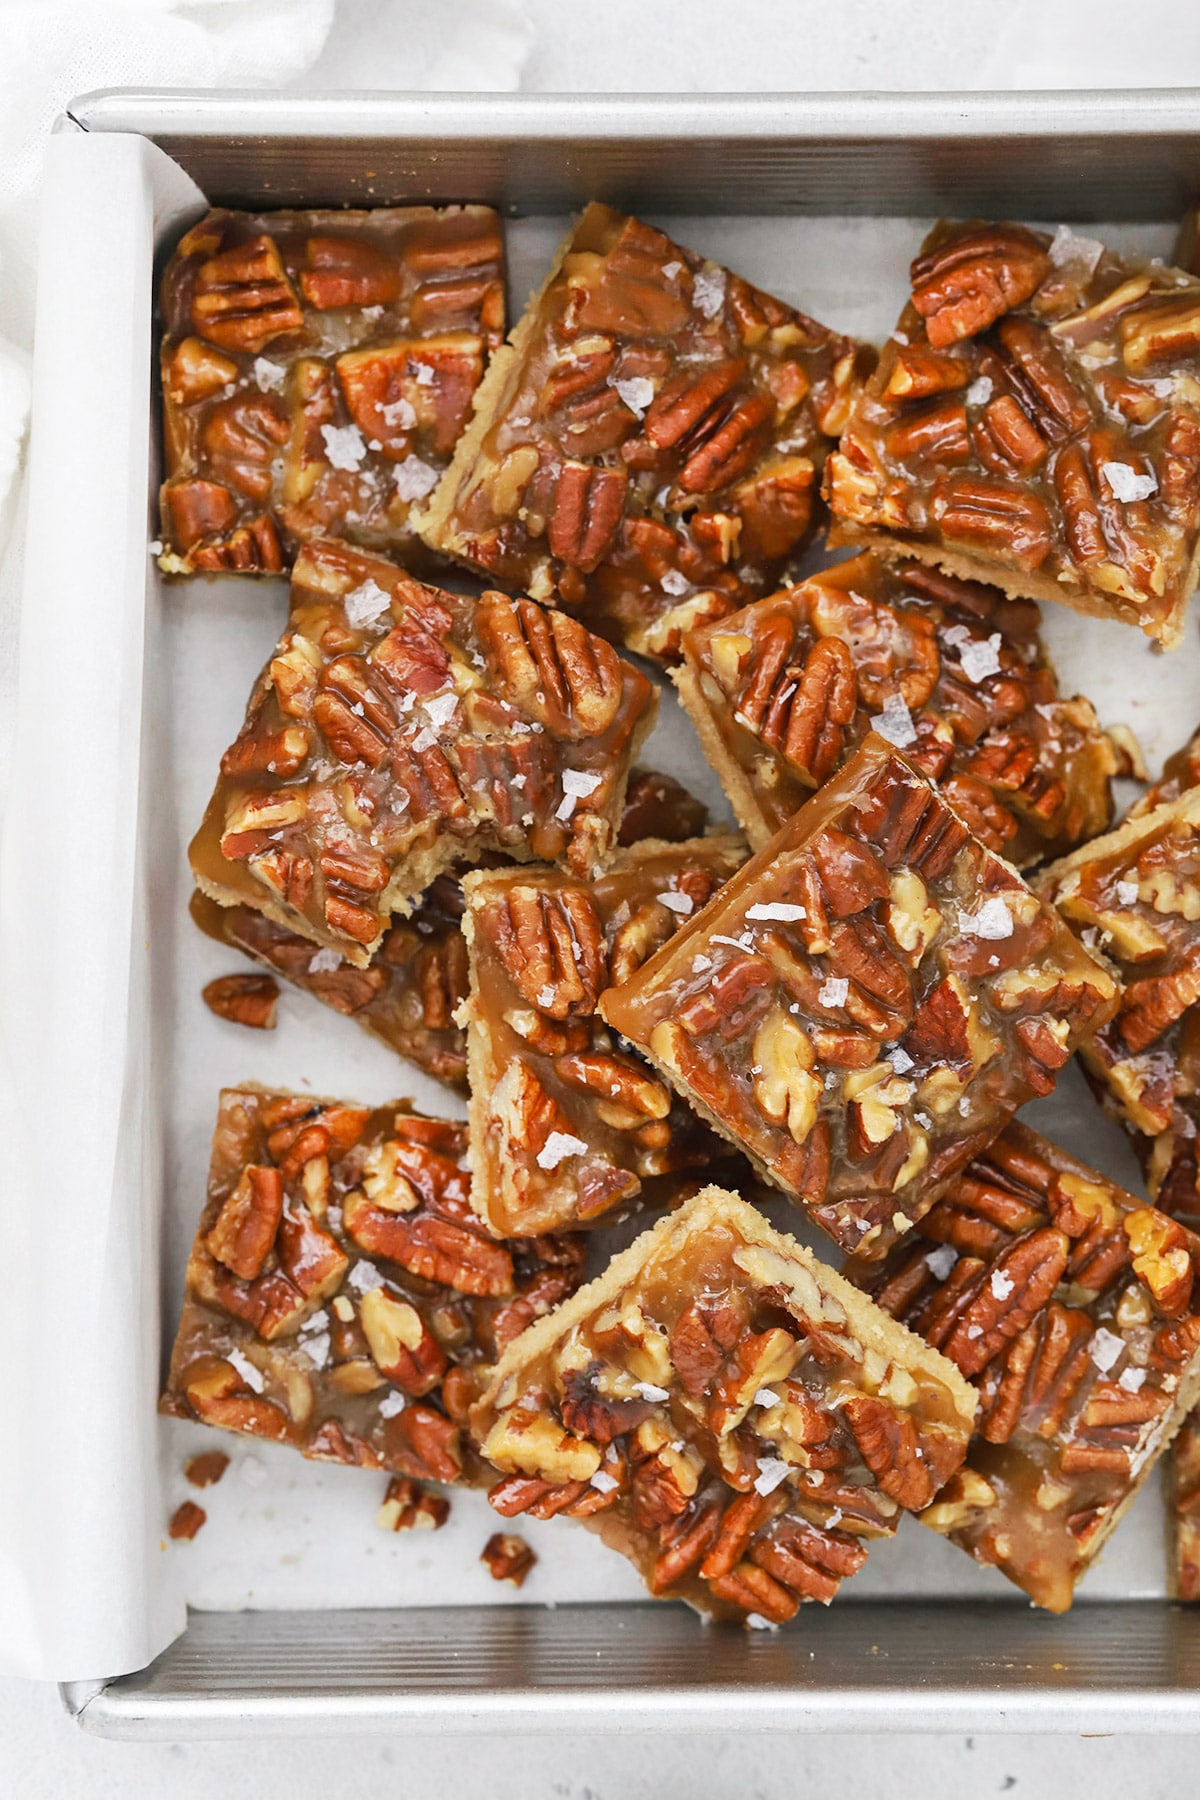 Overhead view of sliced gluten-free salted caramel pecan bars in a baking dish